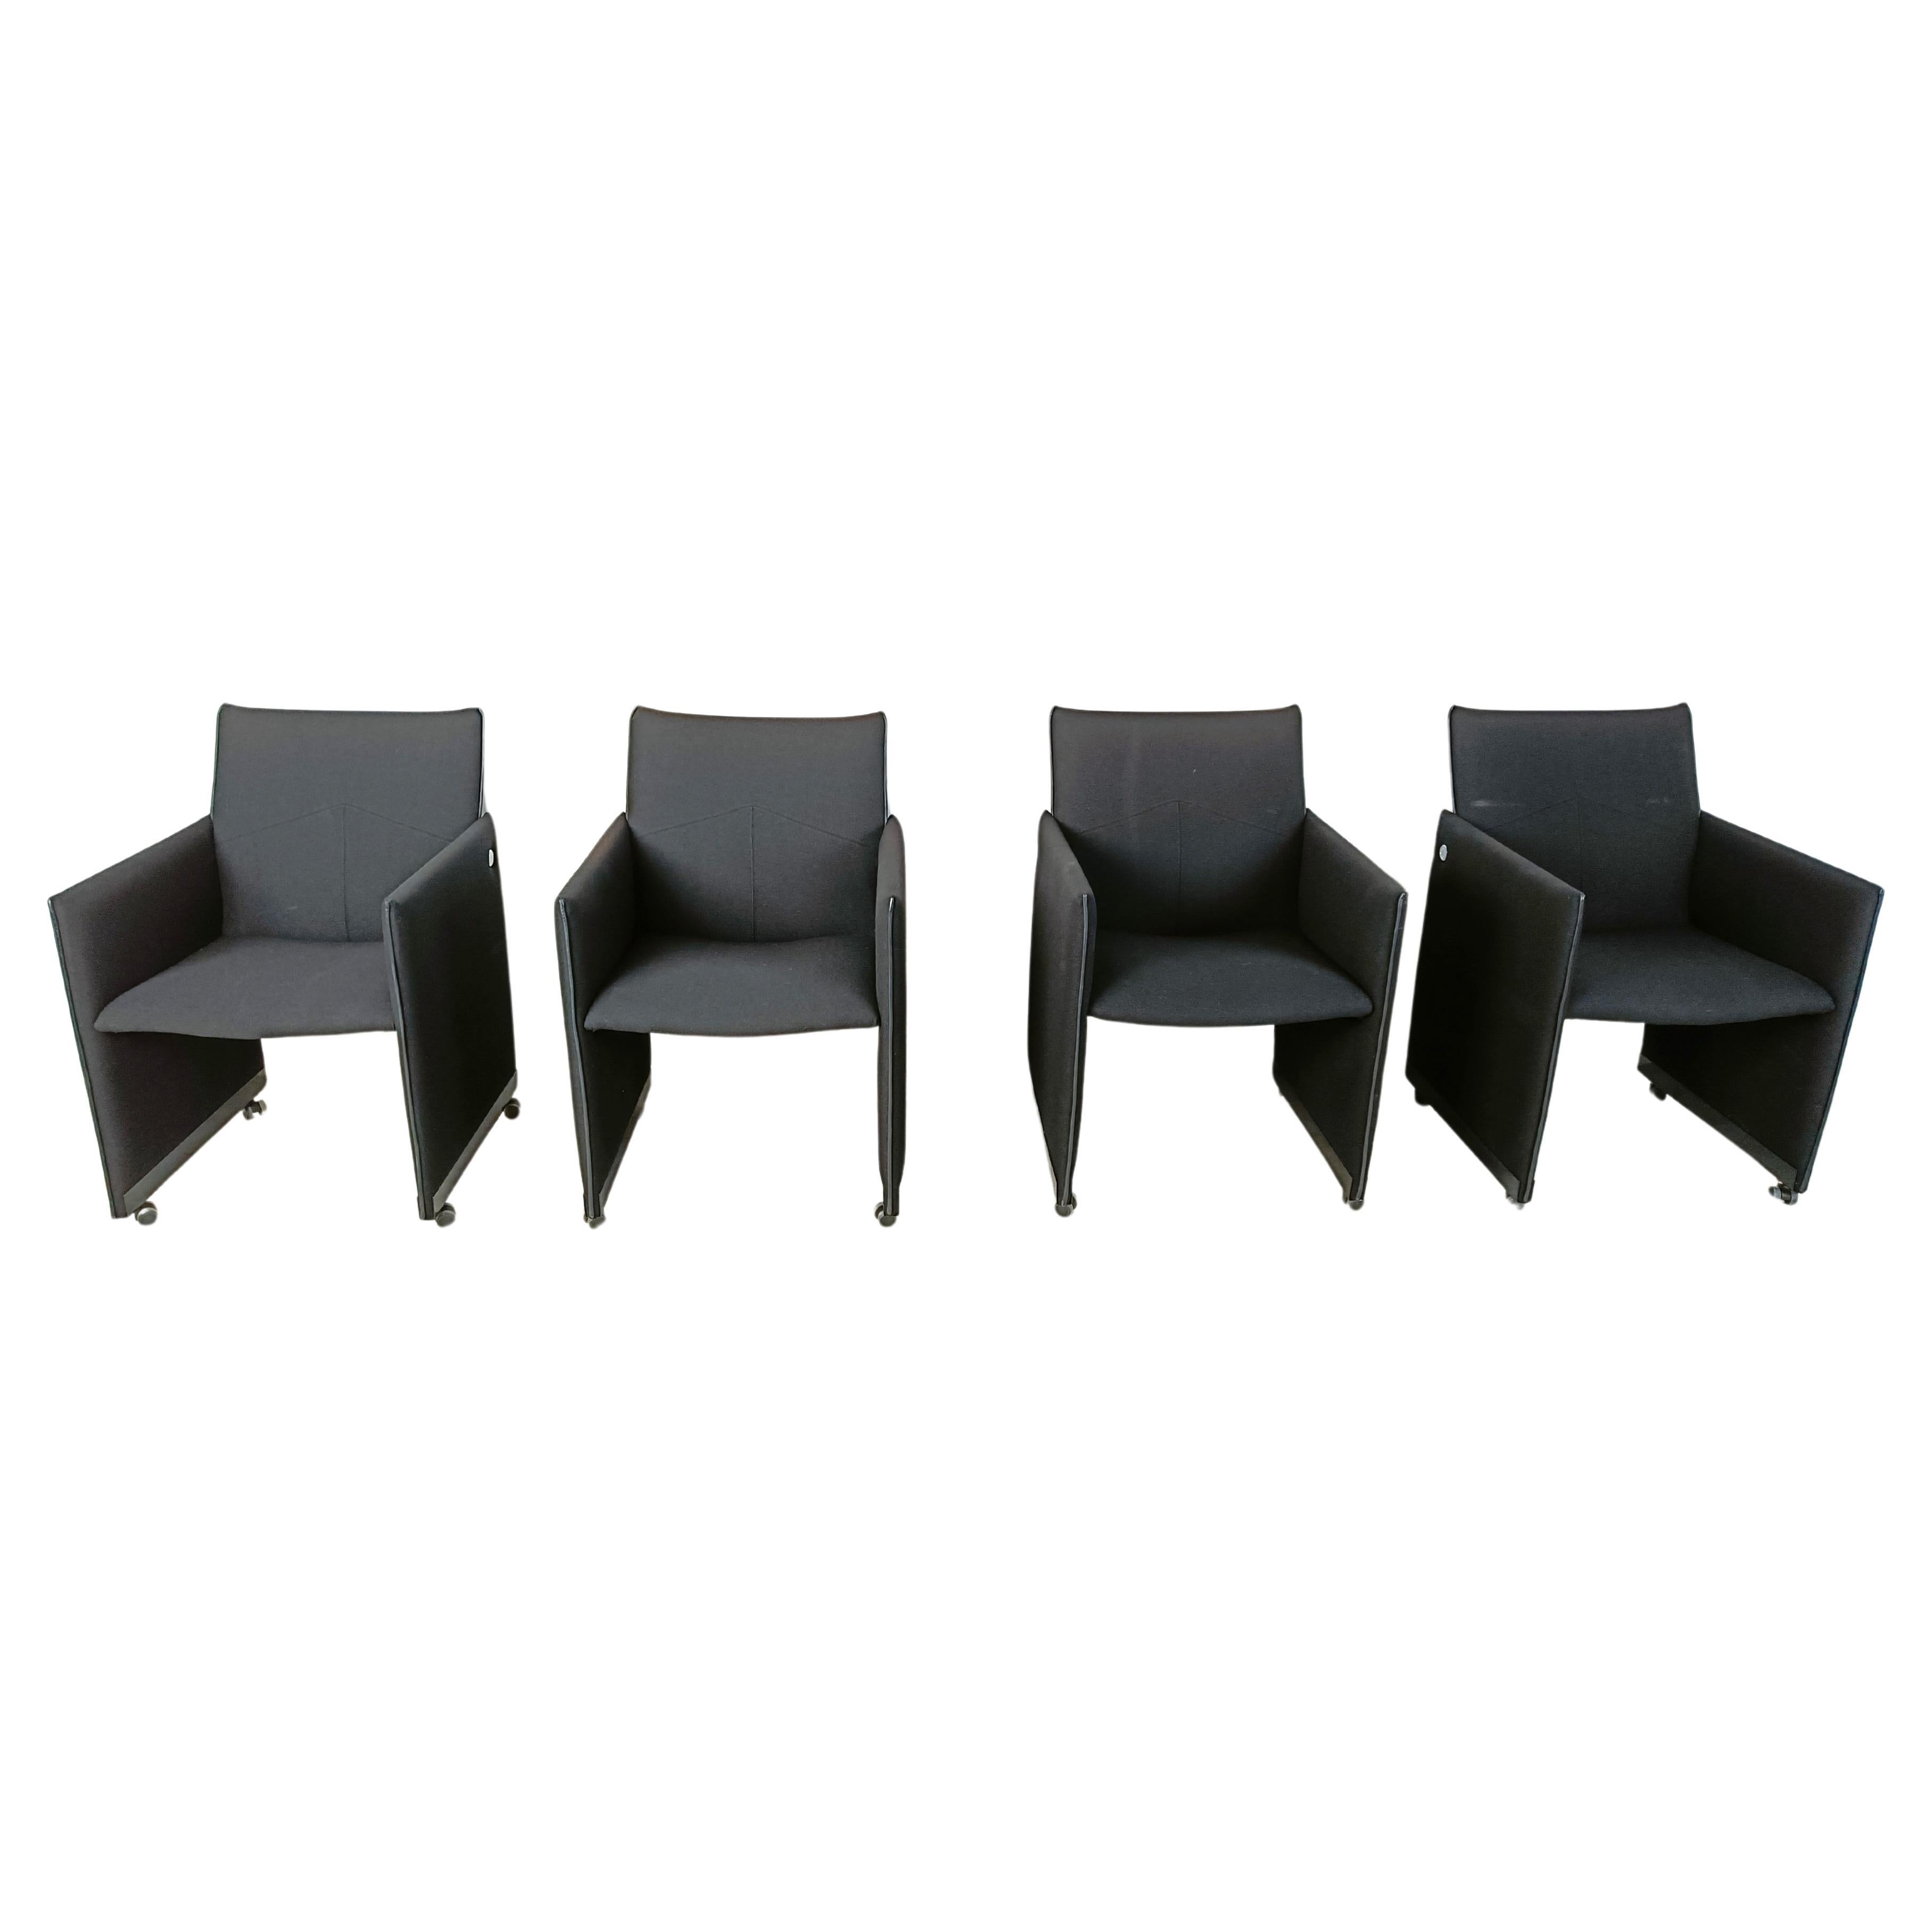 Montana armchairs by Geoffrey Harcourt for Artifort, 1990s - set of 4 For Sale